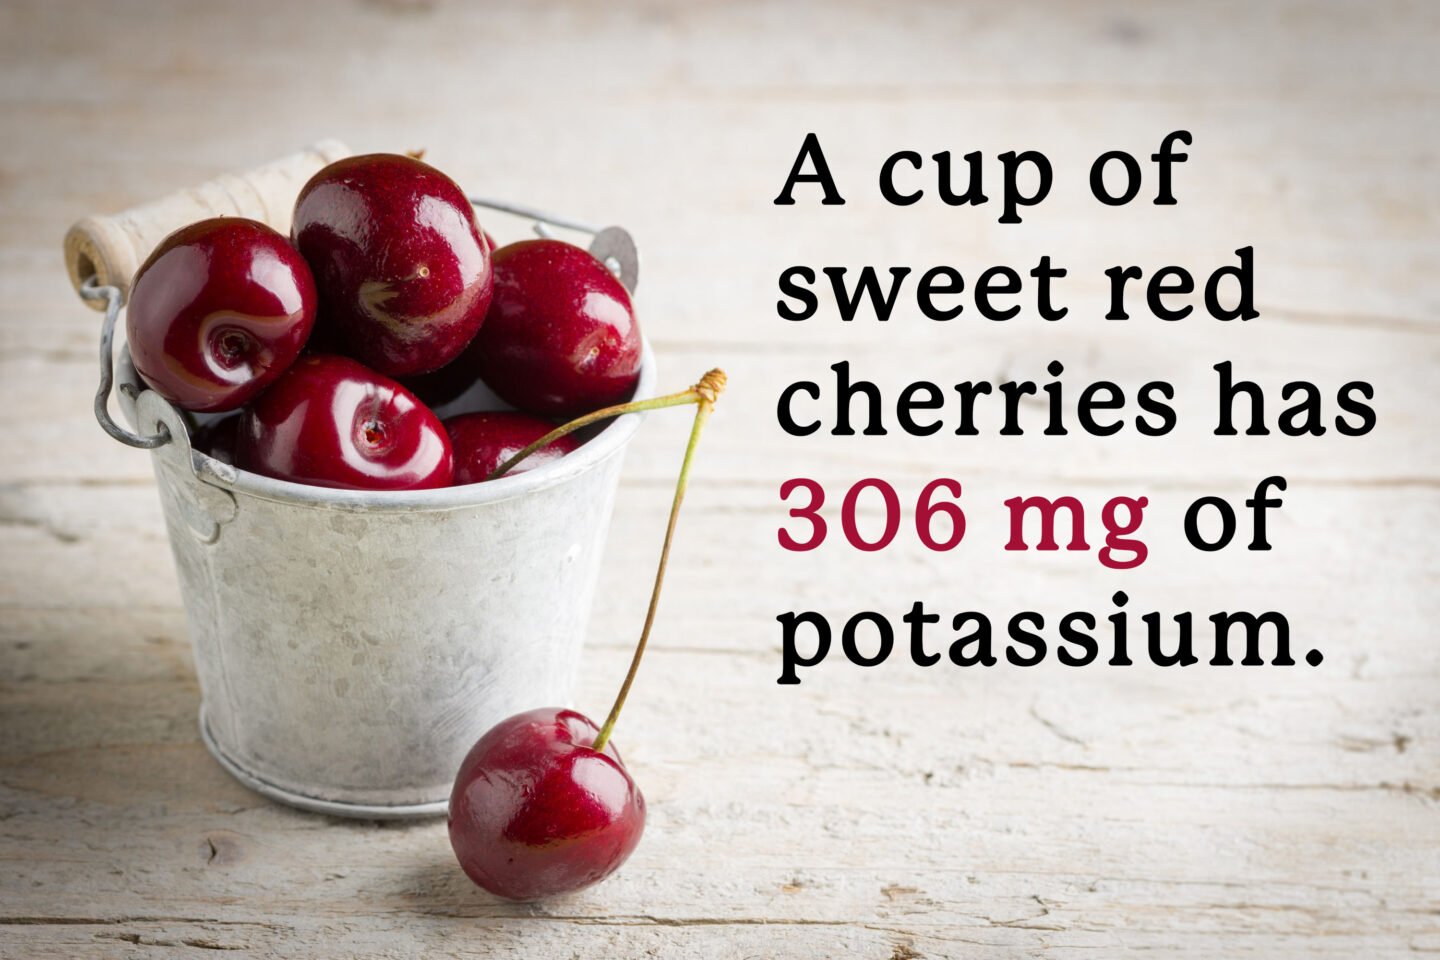 potassium in a cup of cherries